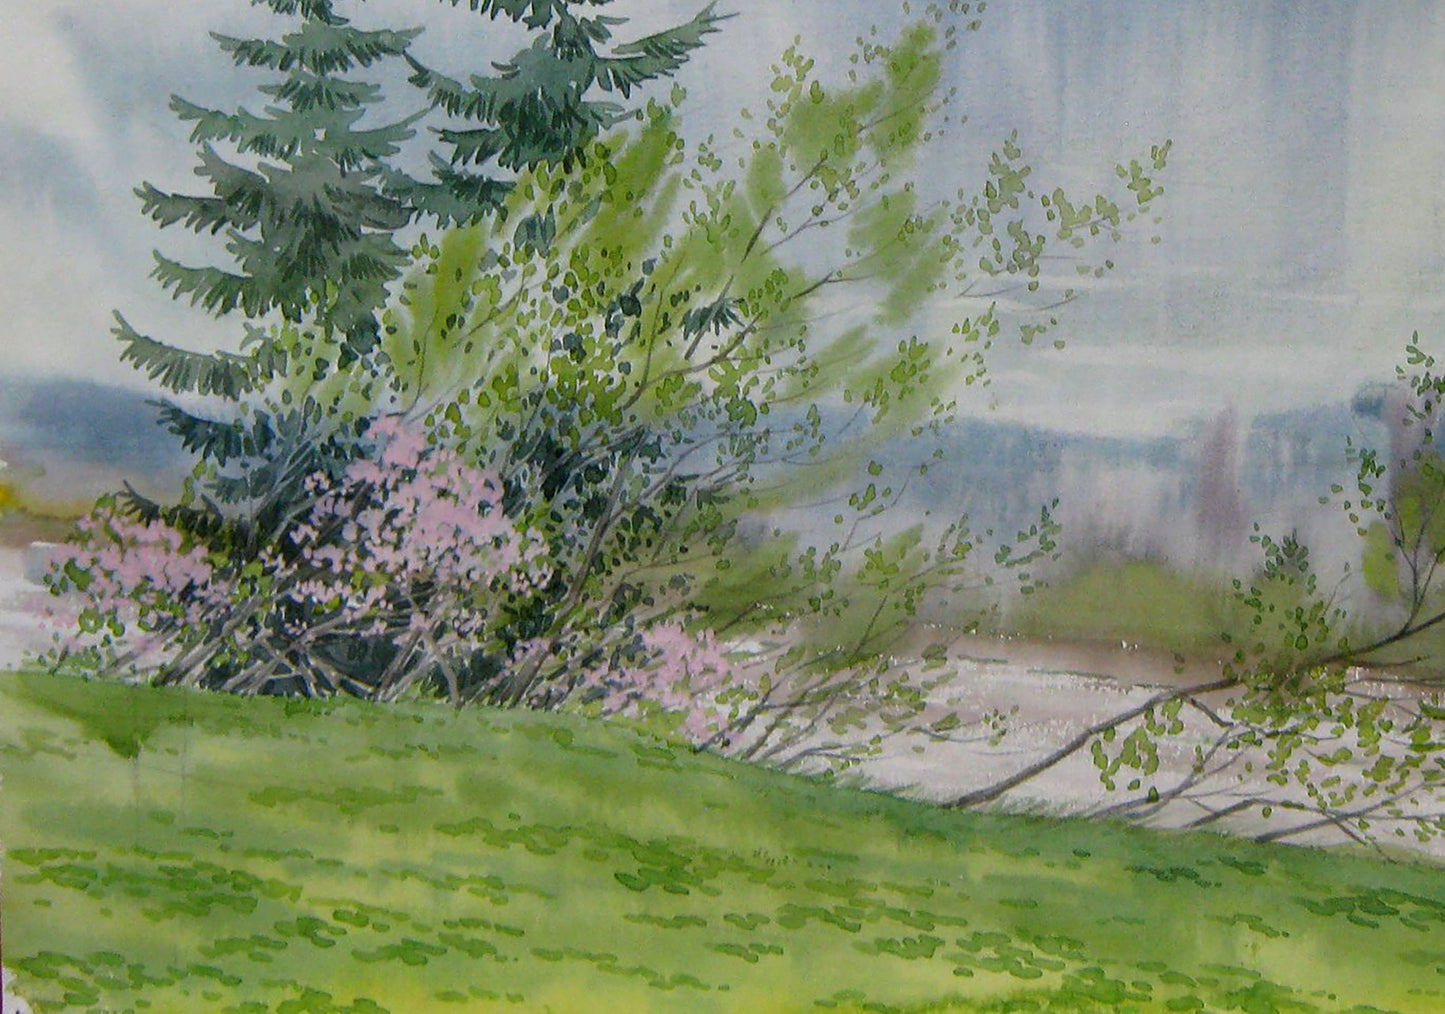 Gloomy Day by Valery Savenets, a watercolor depiction of somber weather conditions.